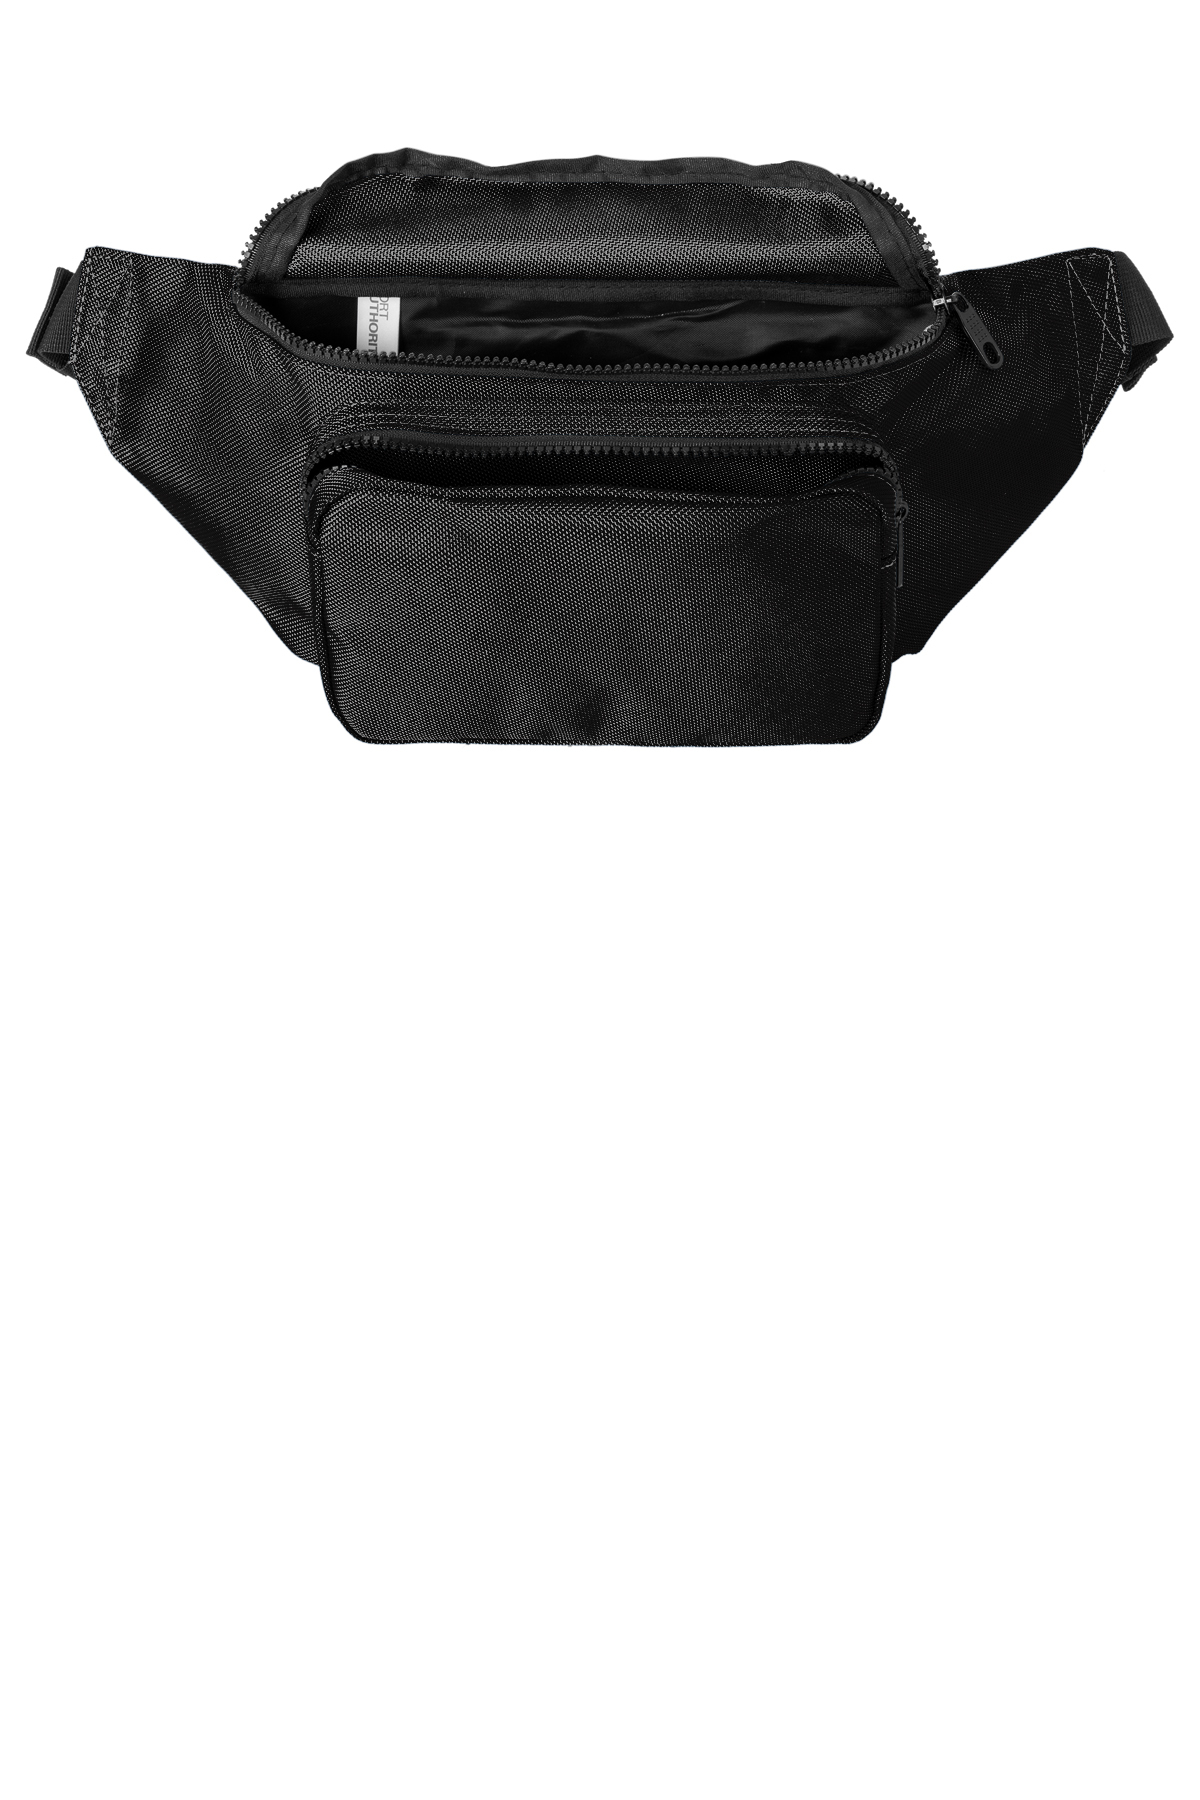 Port Authority Large Crossbody Hip Pack | Product | SanMar